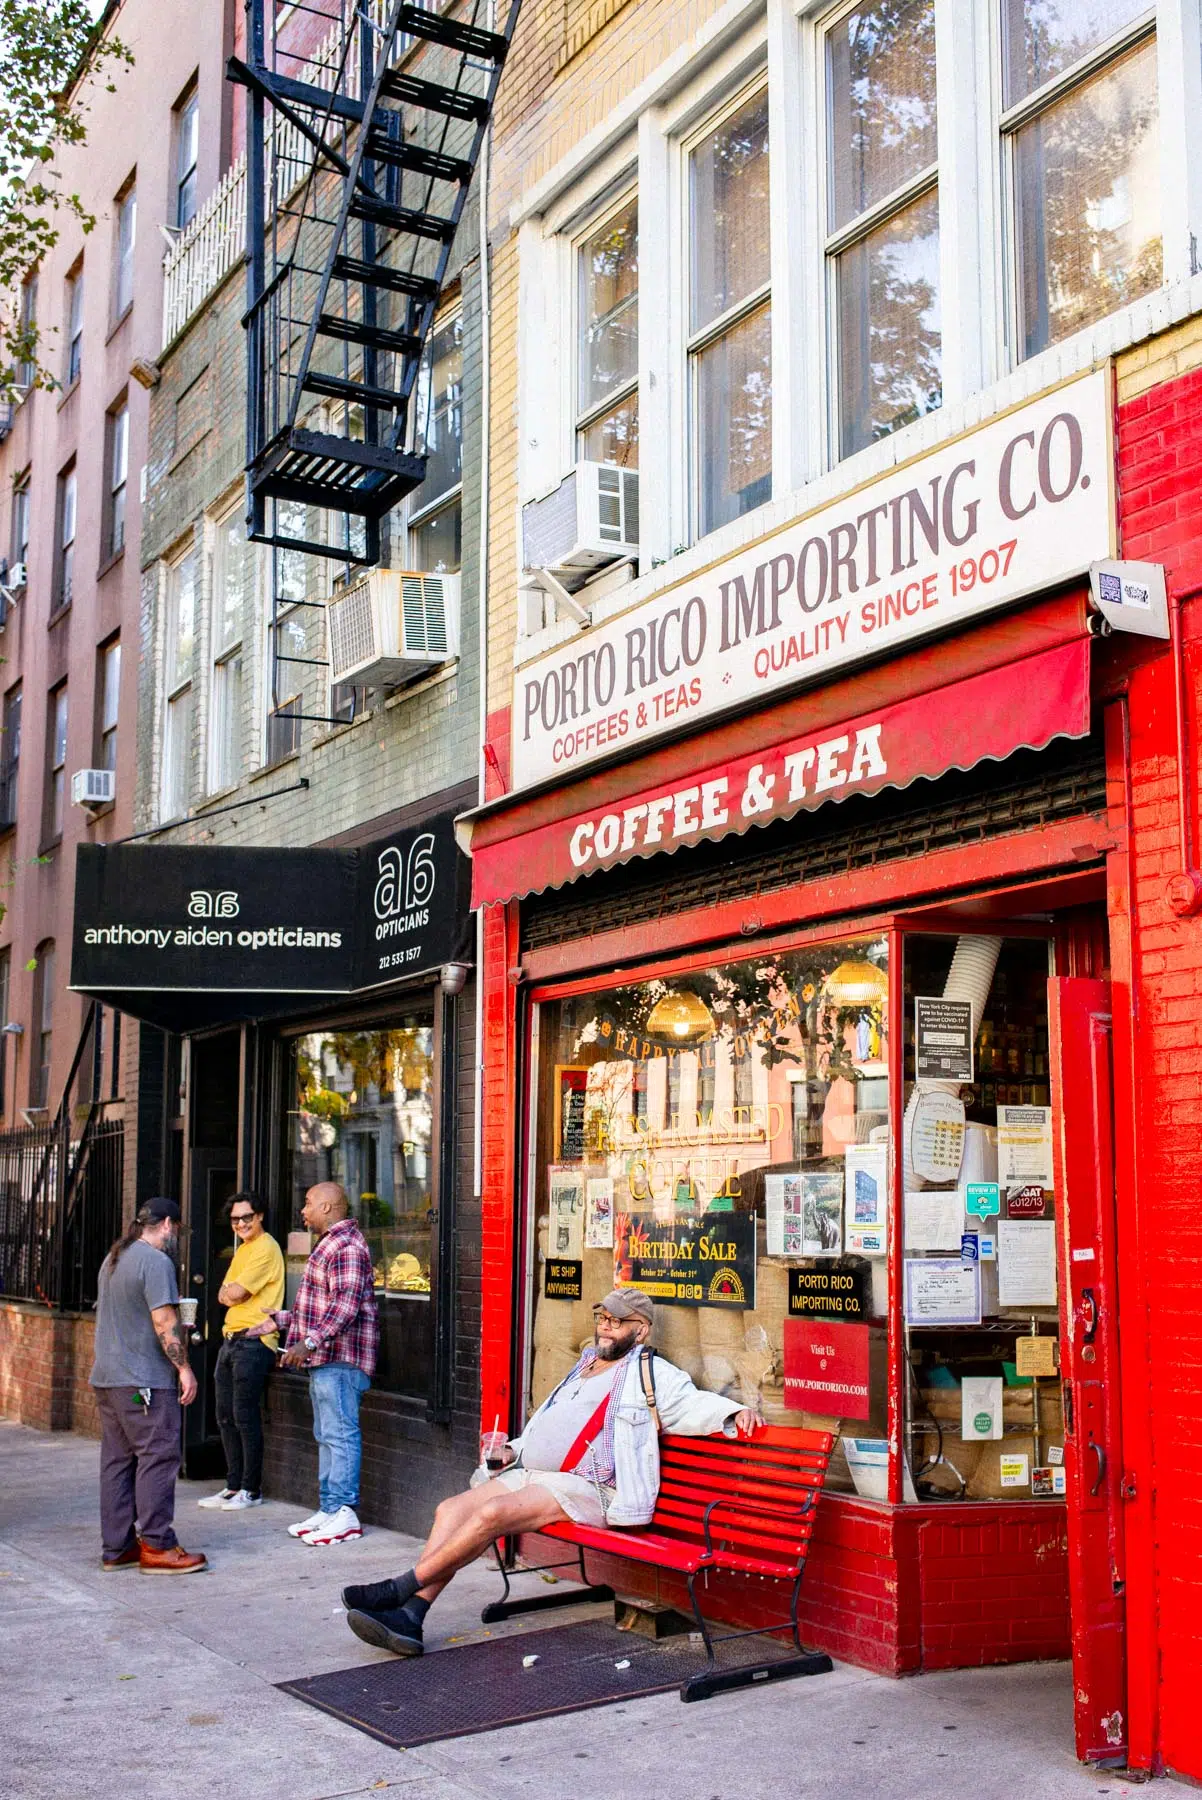 Porto Rico Importing Company, best cafes Greenwich Village